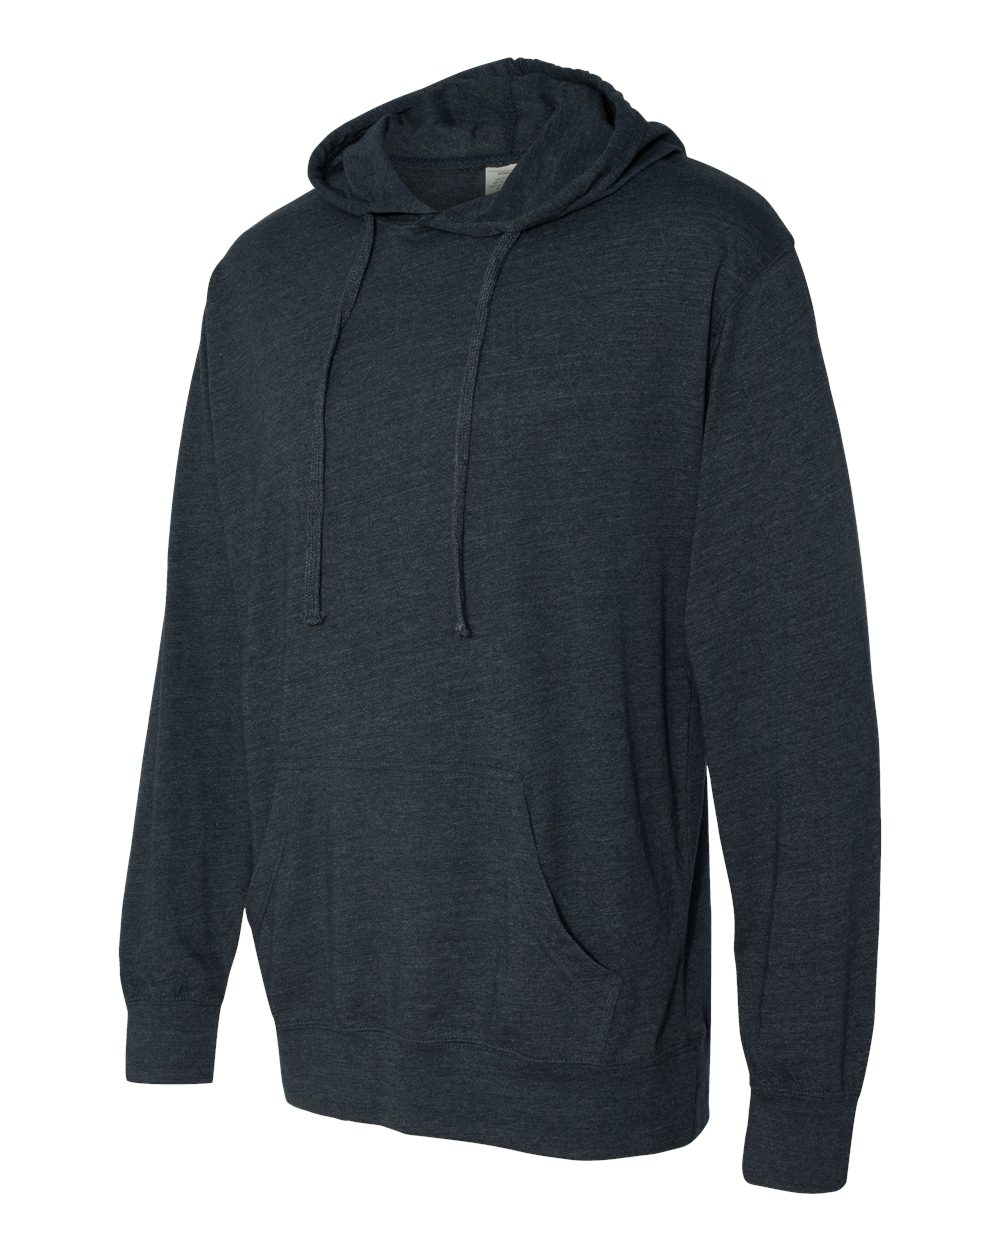 Independent Trading Co. Lightweight Hooded Pullover T-Shirt - SS150J